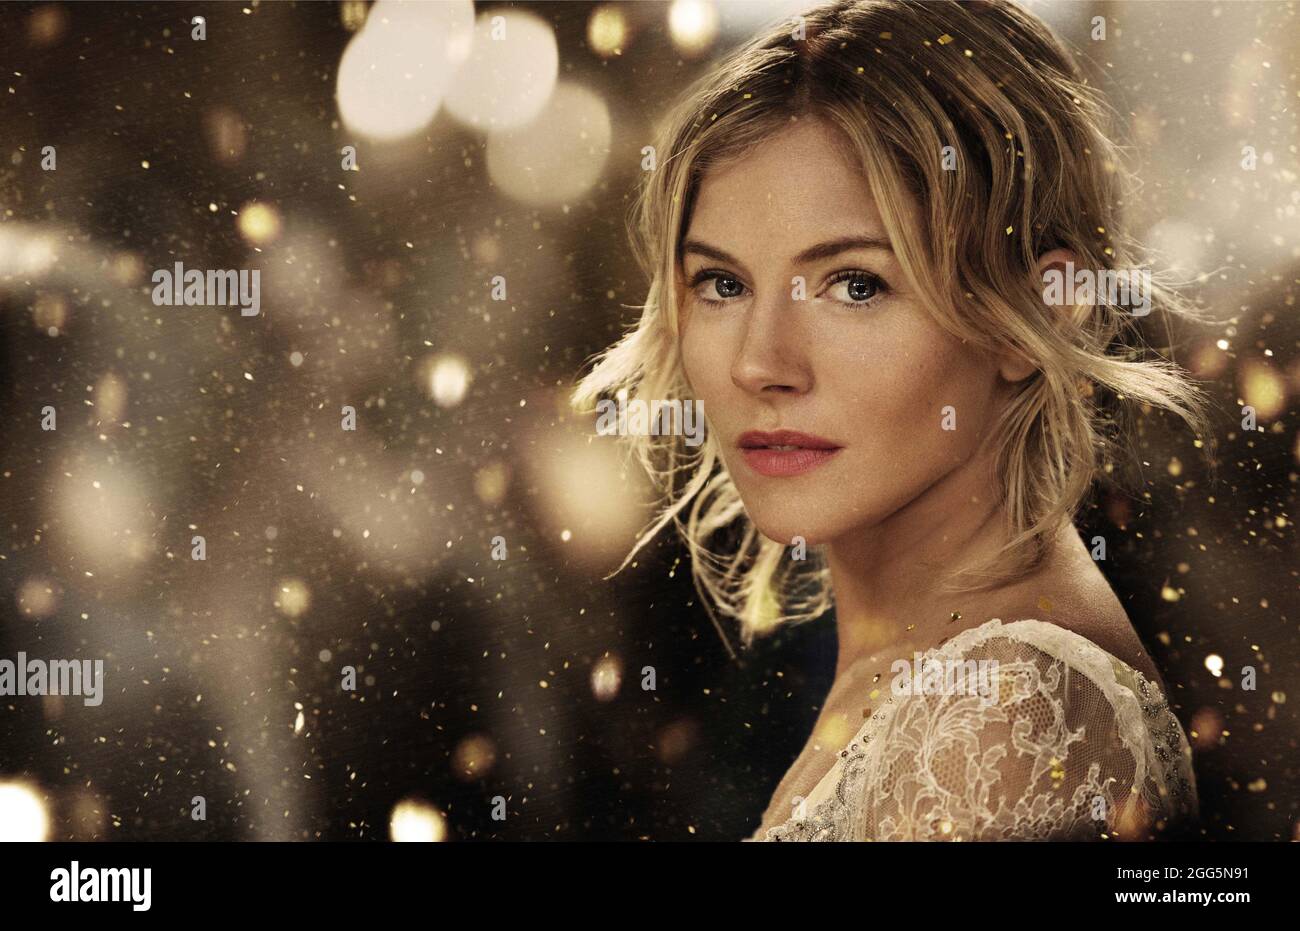 SIENNA MILLER in THE TALE OF THOMAS BURBERRY (2016), directed by ASIF  KAPADIA. Credit: Burberry / Album Stock Photo - Alamy